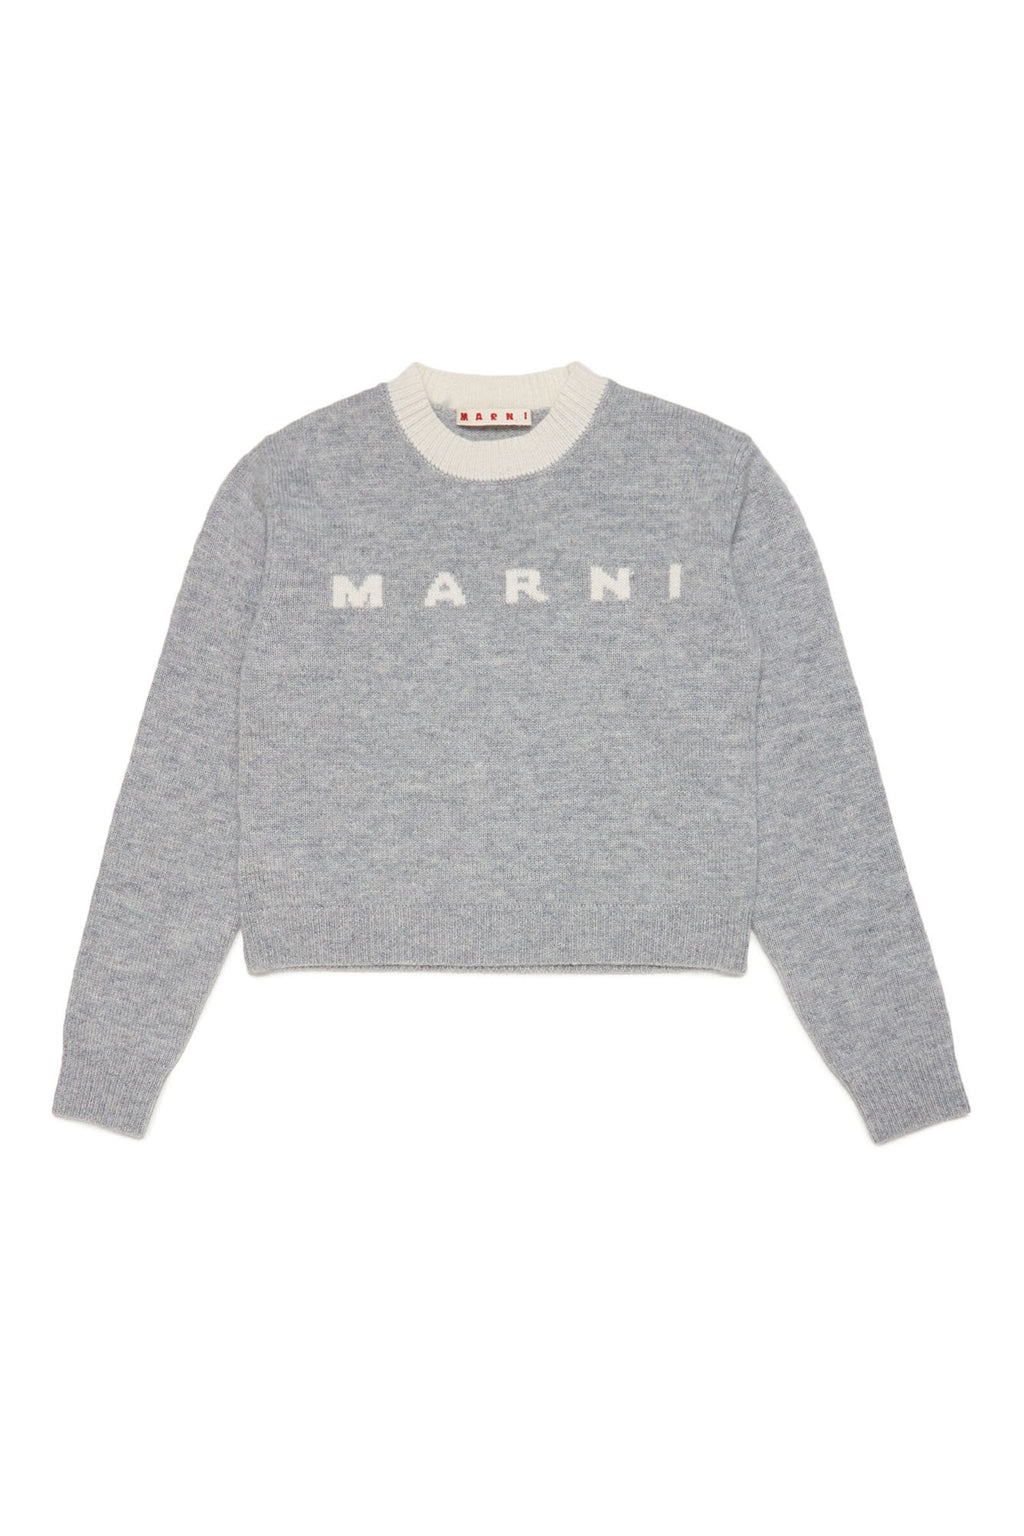 Grey sweater in wool-cashmere blend with jacquard logo and ribbed edges